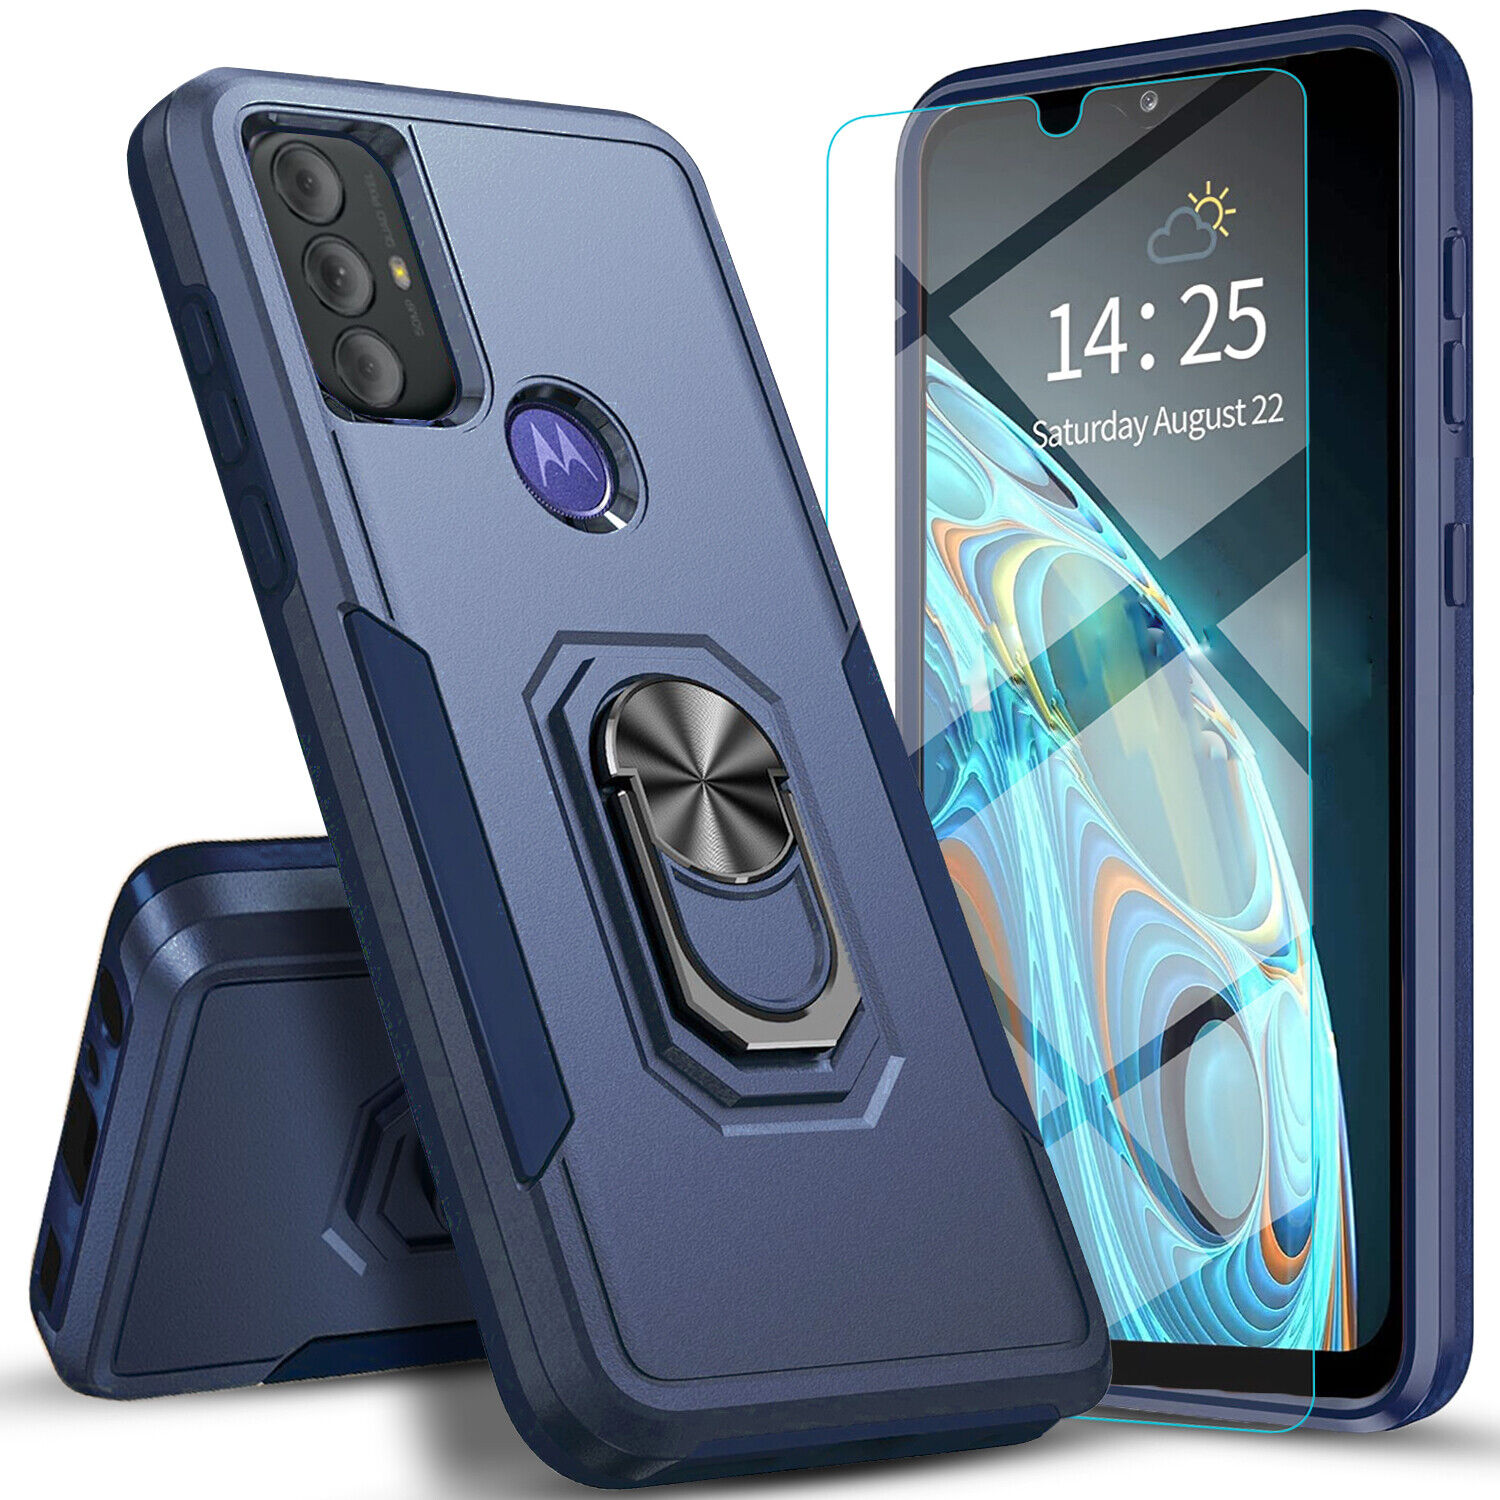 For Motorola G Power 2022 2021 Case, Shockproof Cover + Tempered Glass Protector